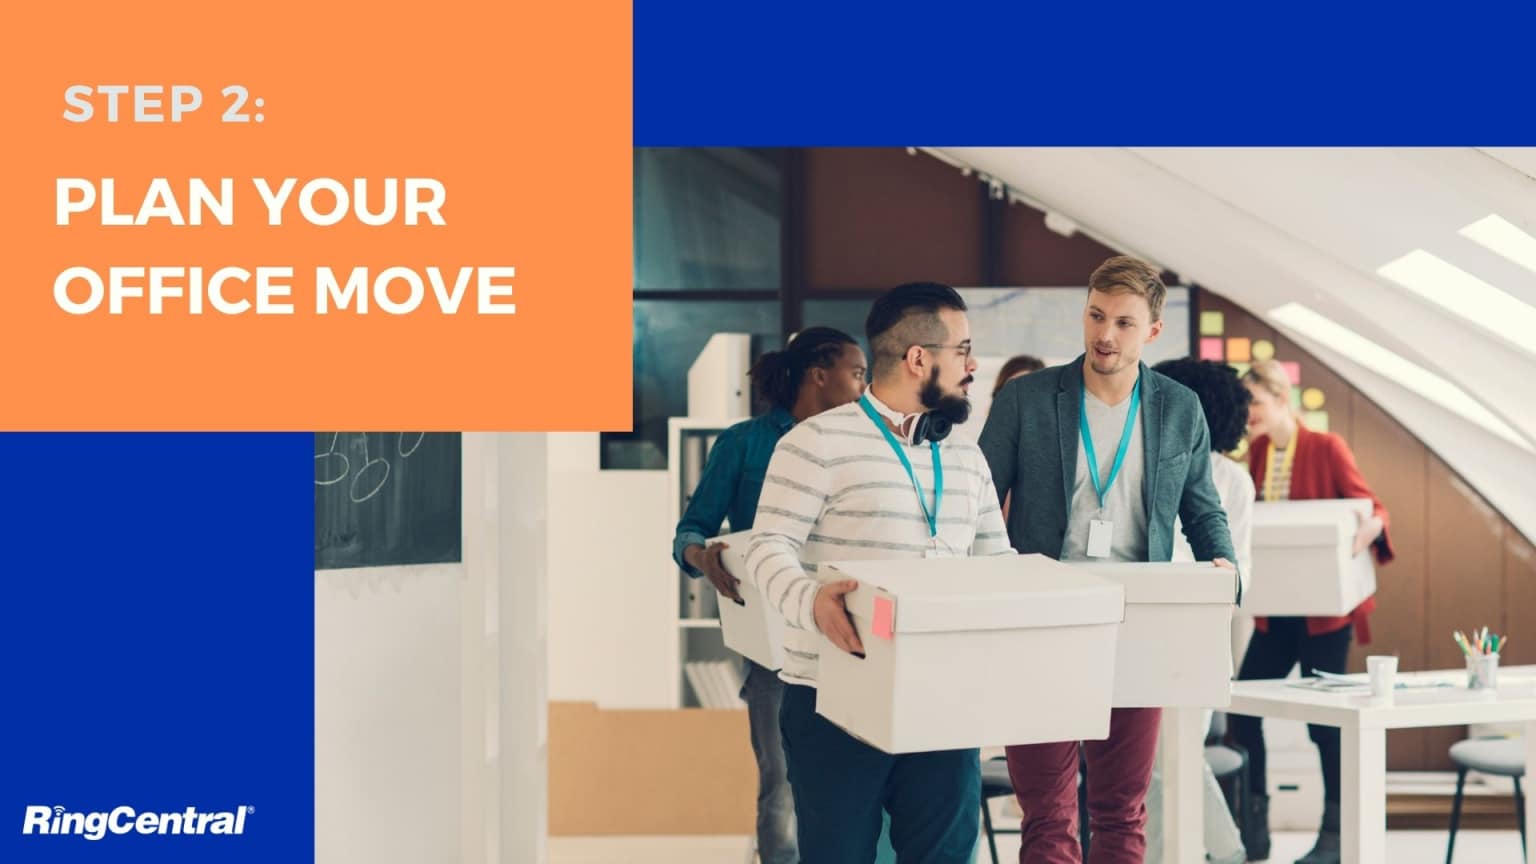 Moving Office - Plan your office move